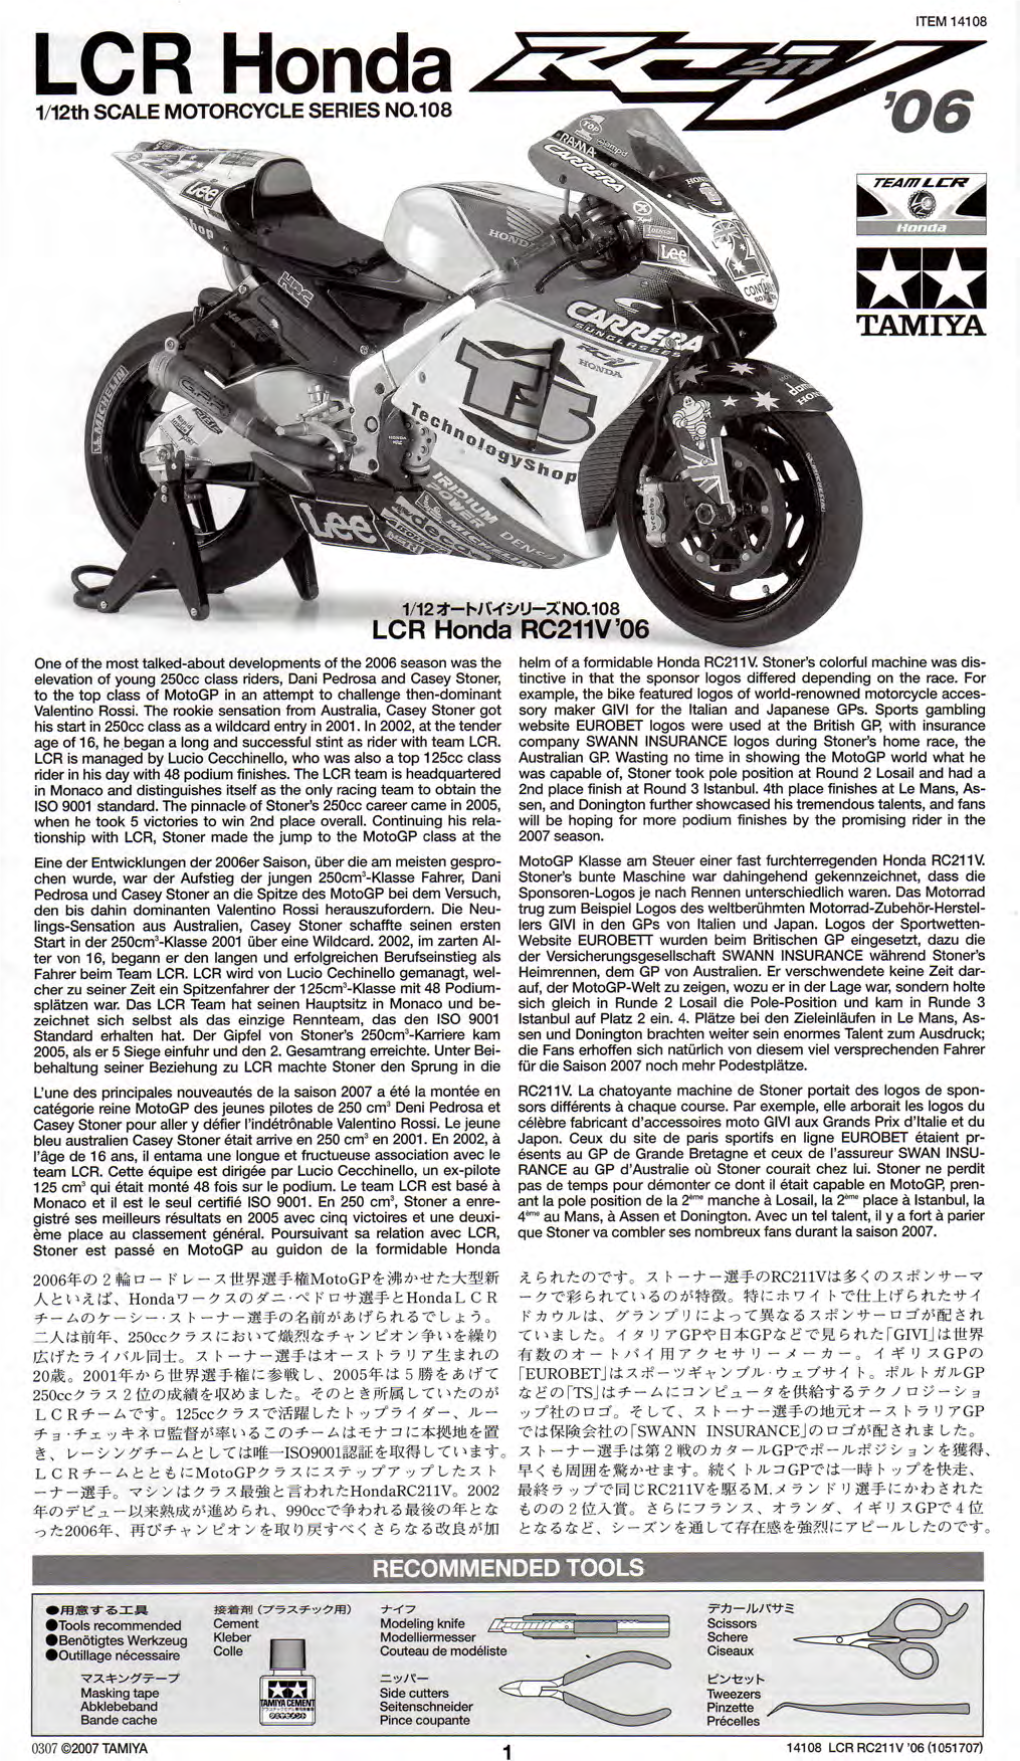 LCR Honda 1/12Th SCALE MOTORCYCLE SERIES NO.108